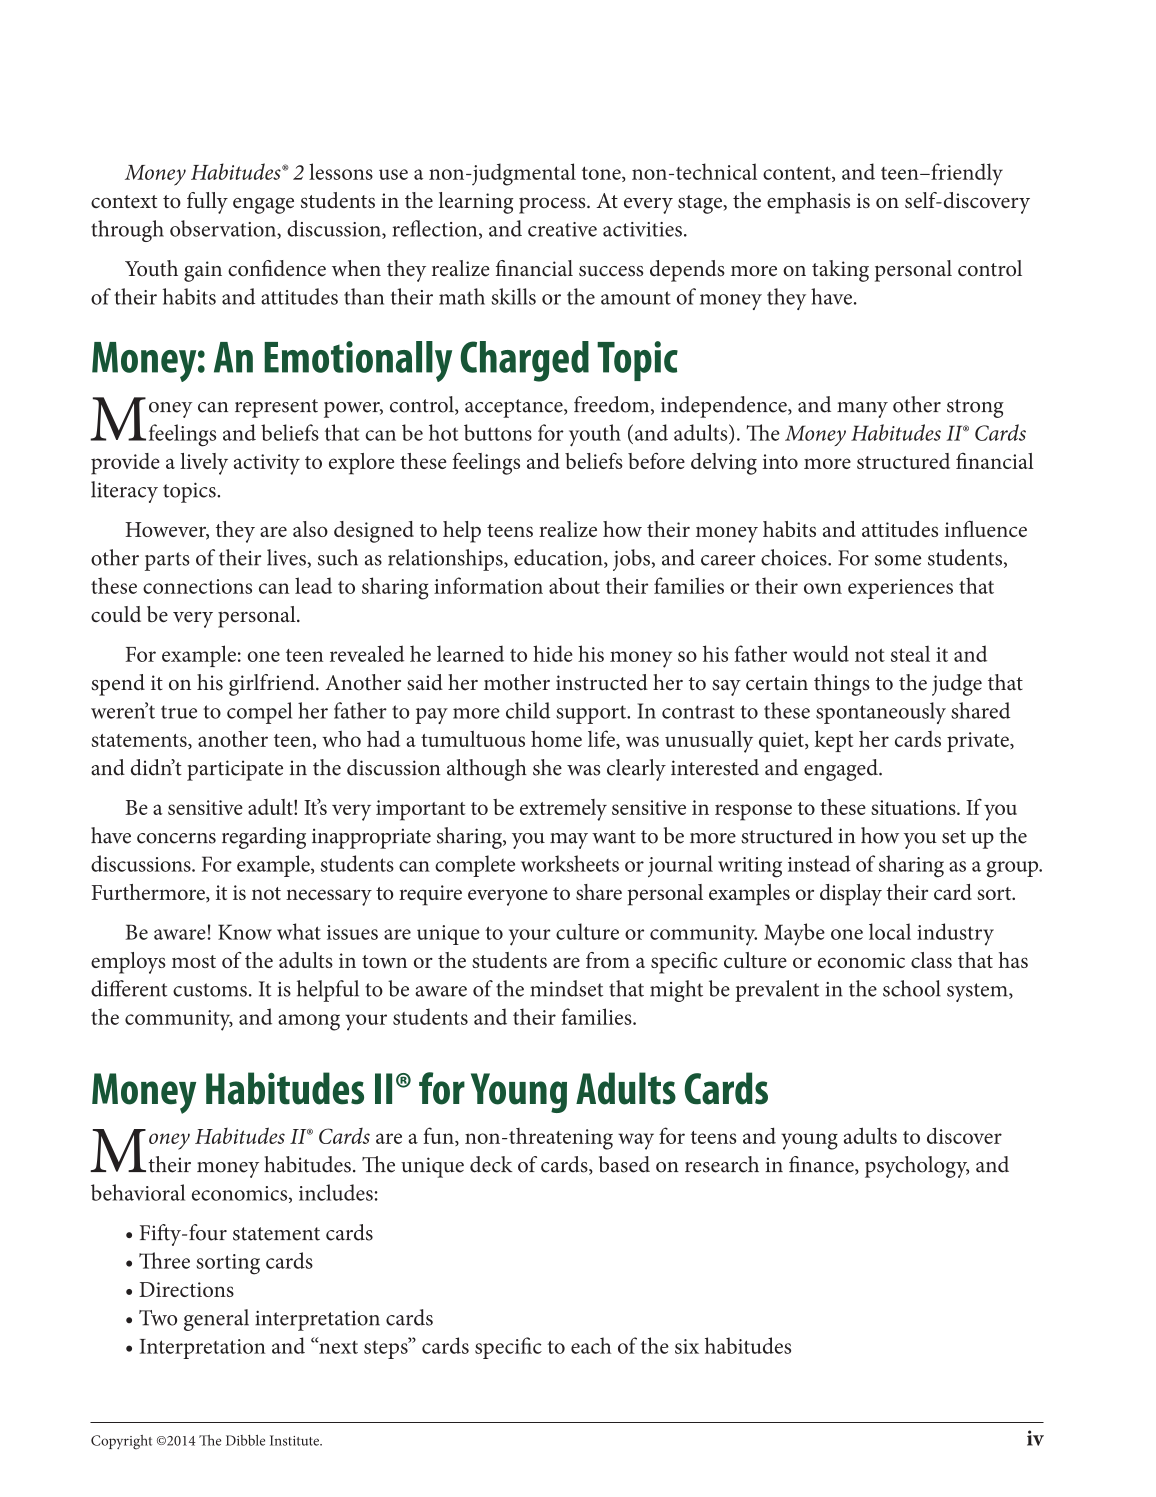 Money Habitudes 2®: For Young Adults page 5